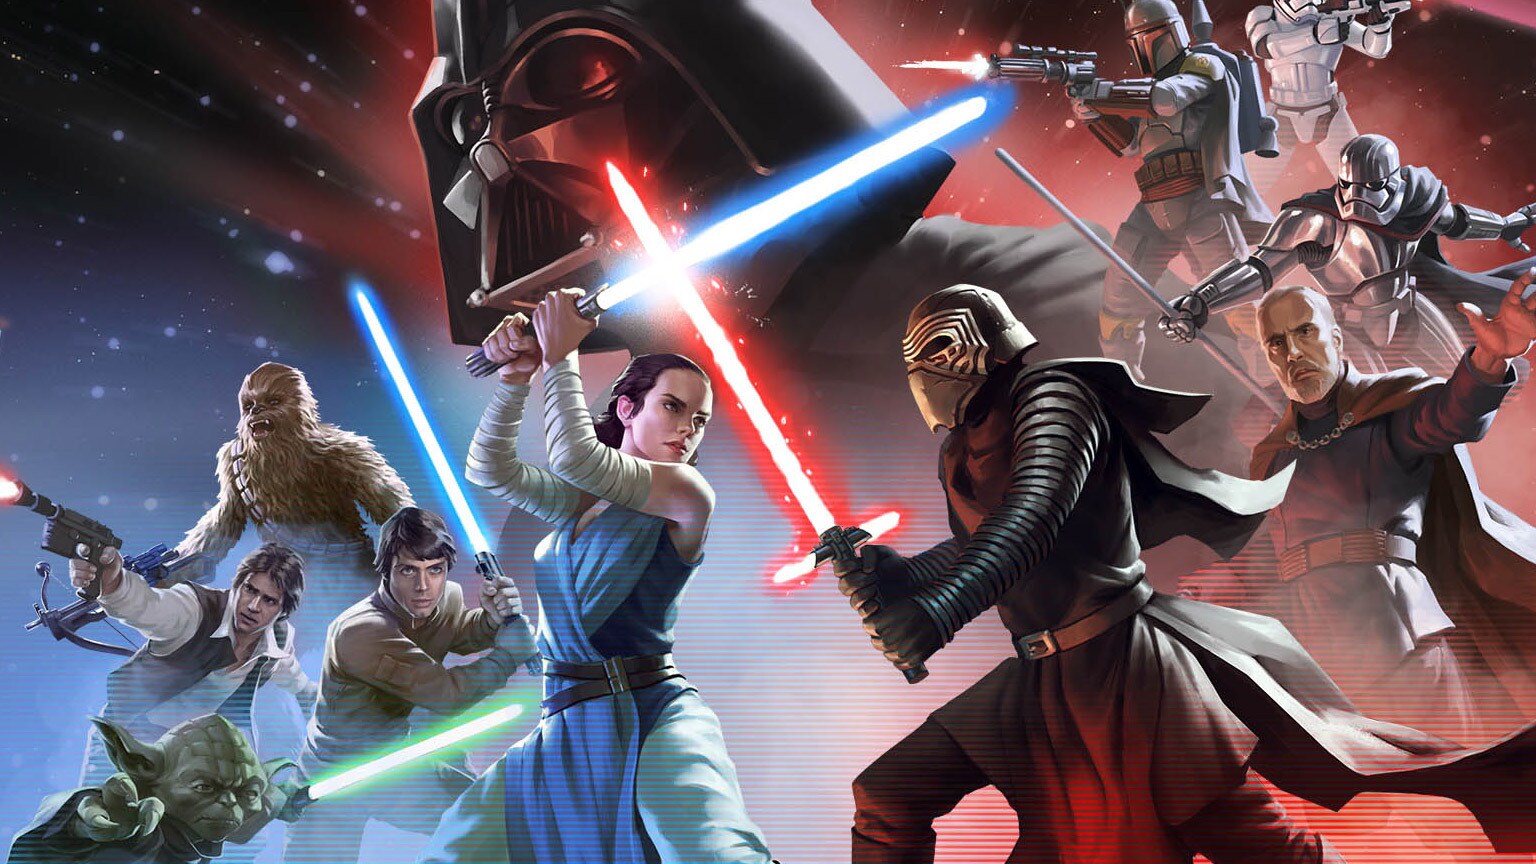 New Star Wars: The Rise of Skywalker Updates Coming to Mobile Games